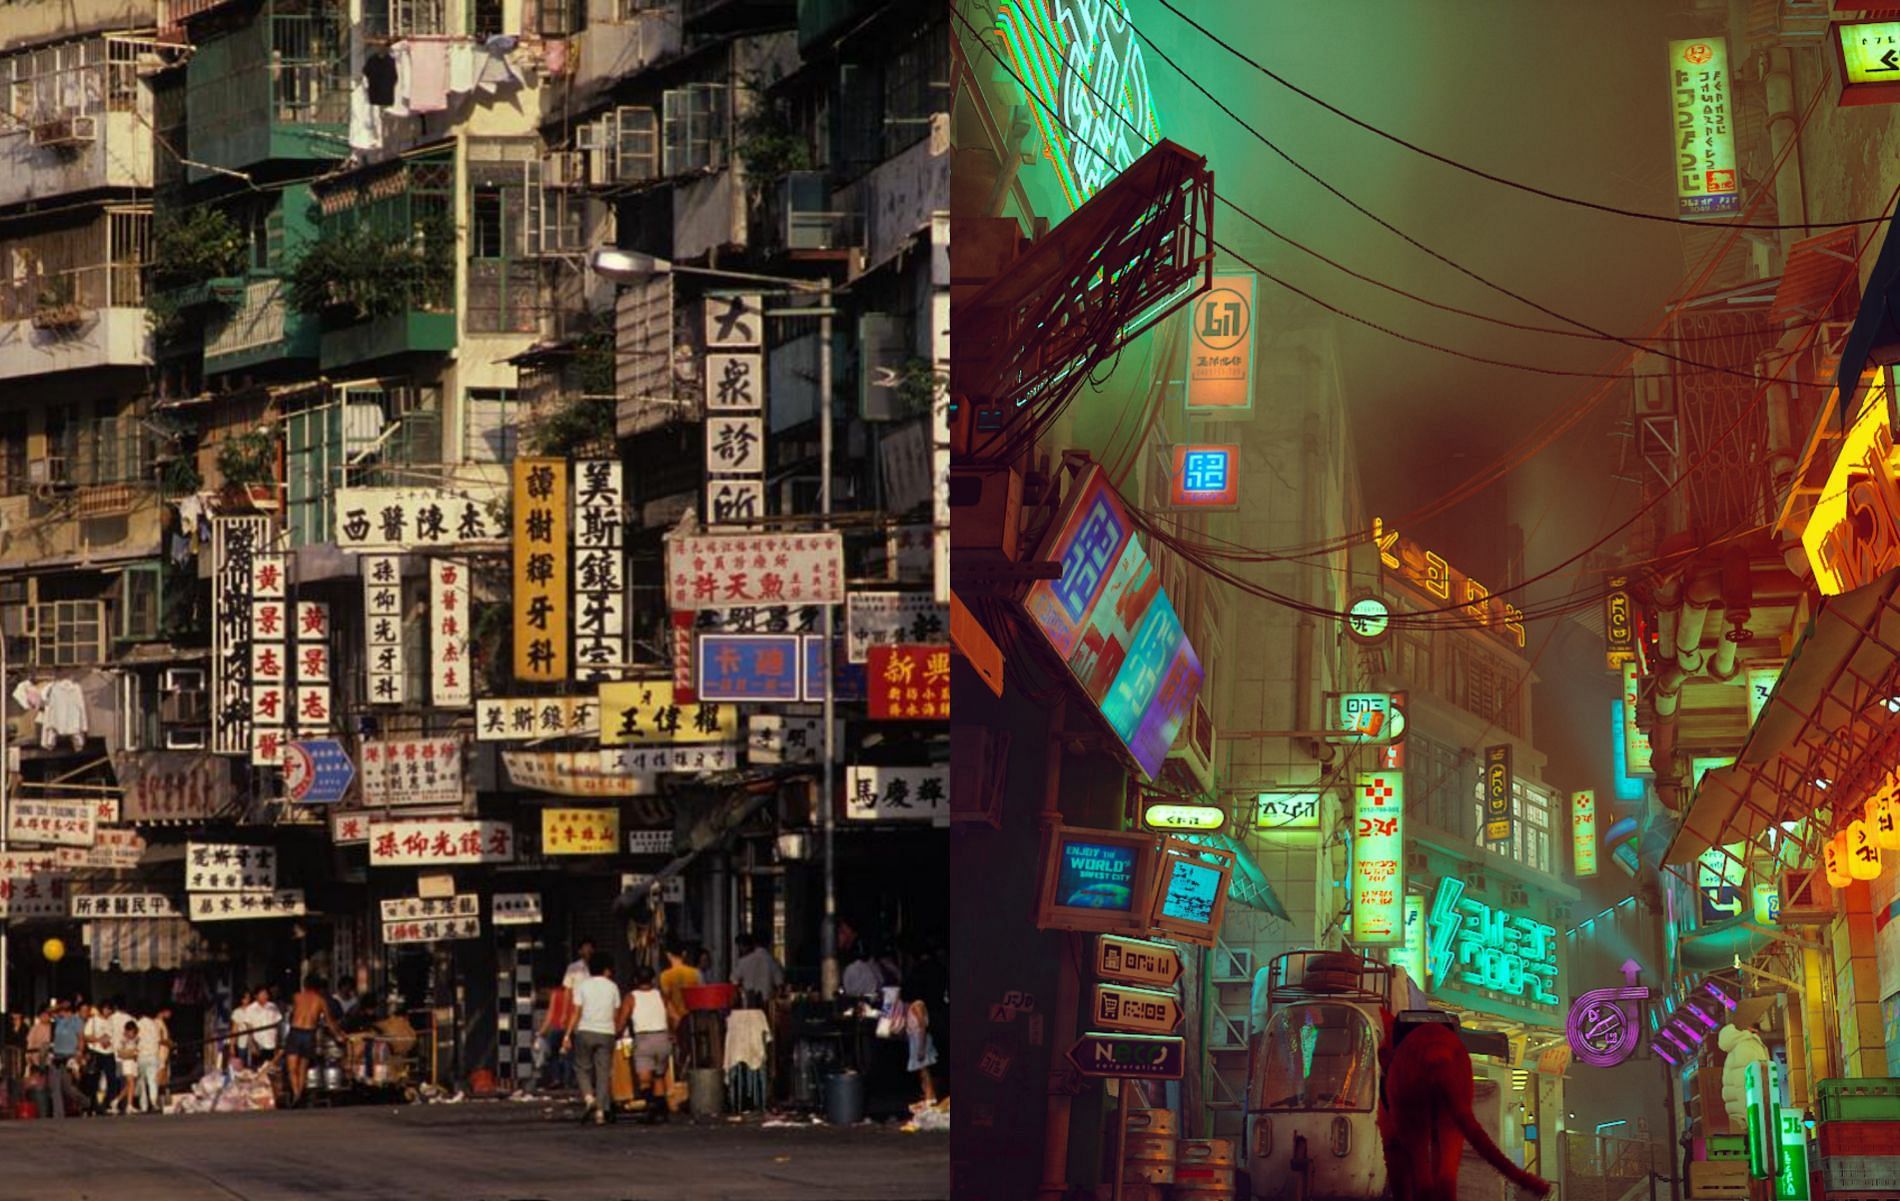 The two worlds (Image on left via Greg Girard, Image on right via Stray)